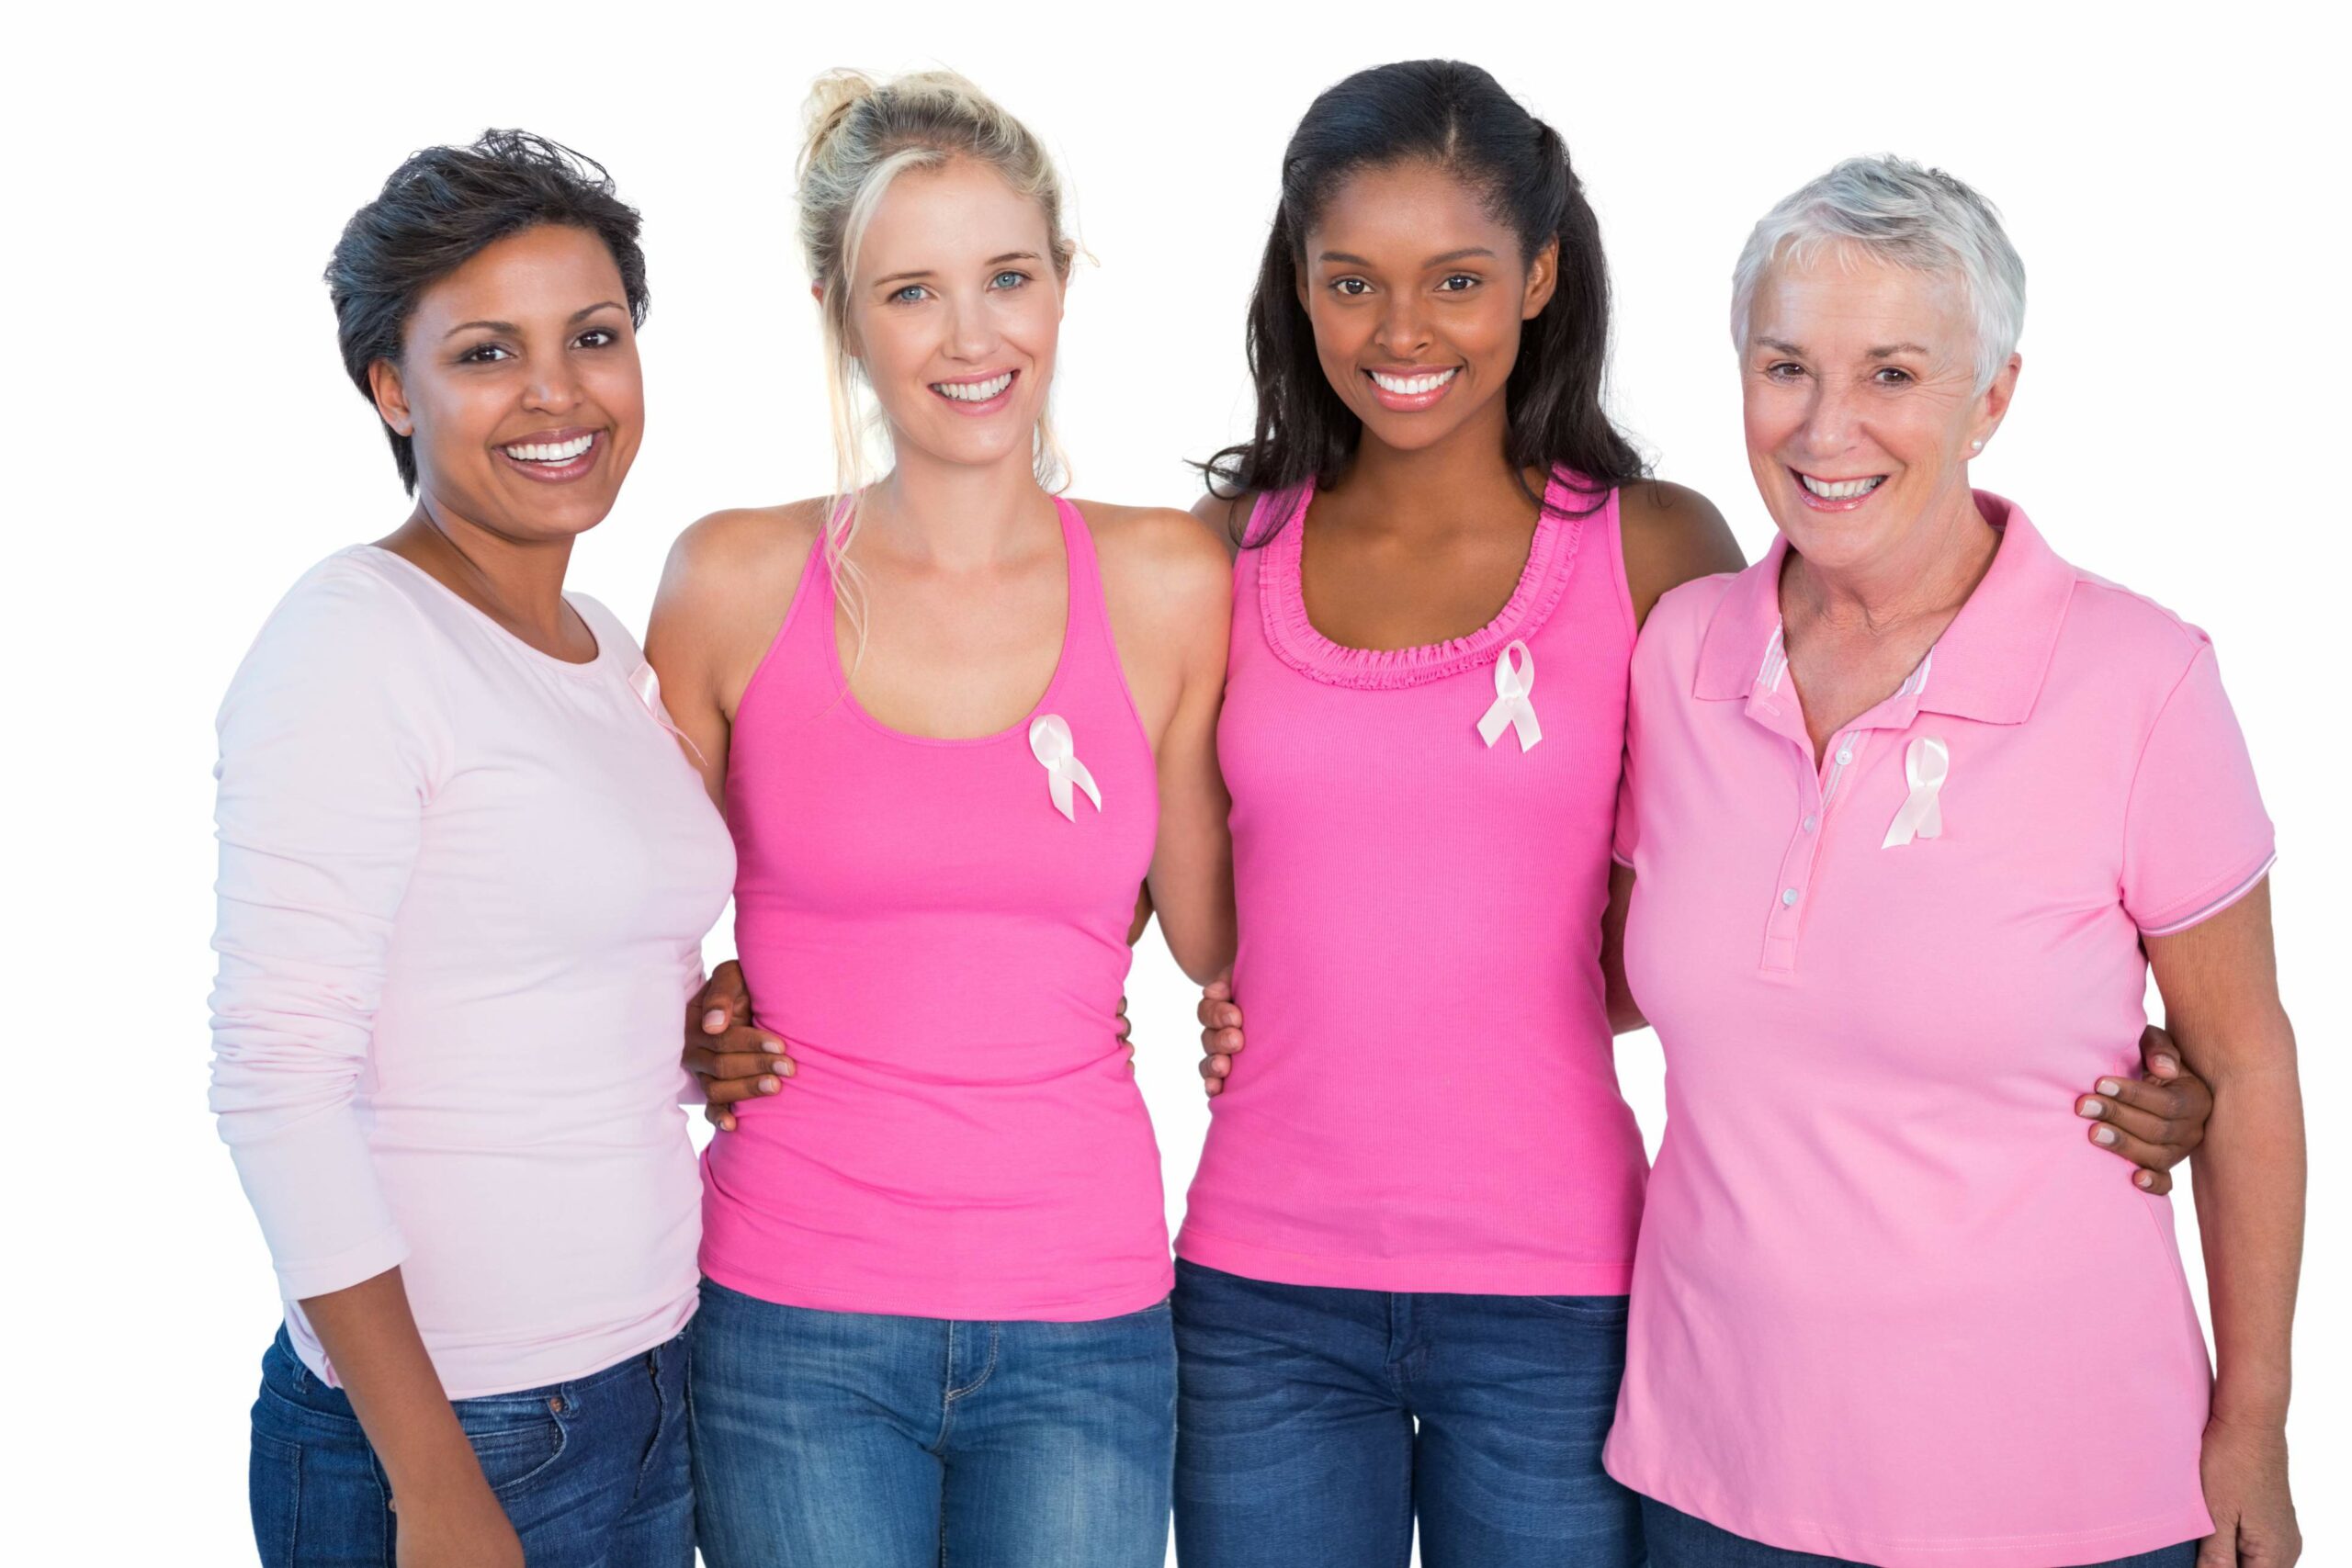 Hope comes in all colors, especially pink! by UofL Health Louisville KY